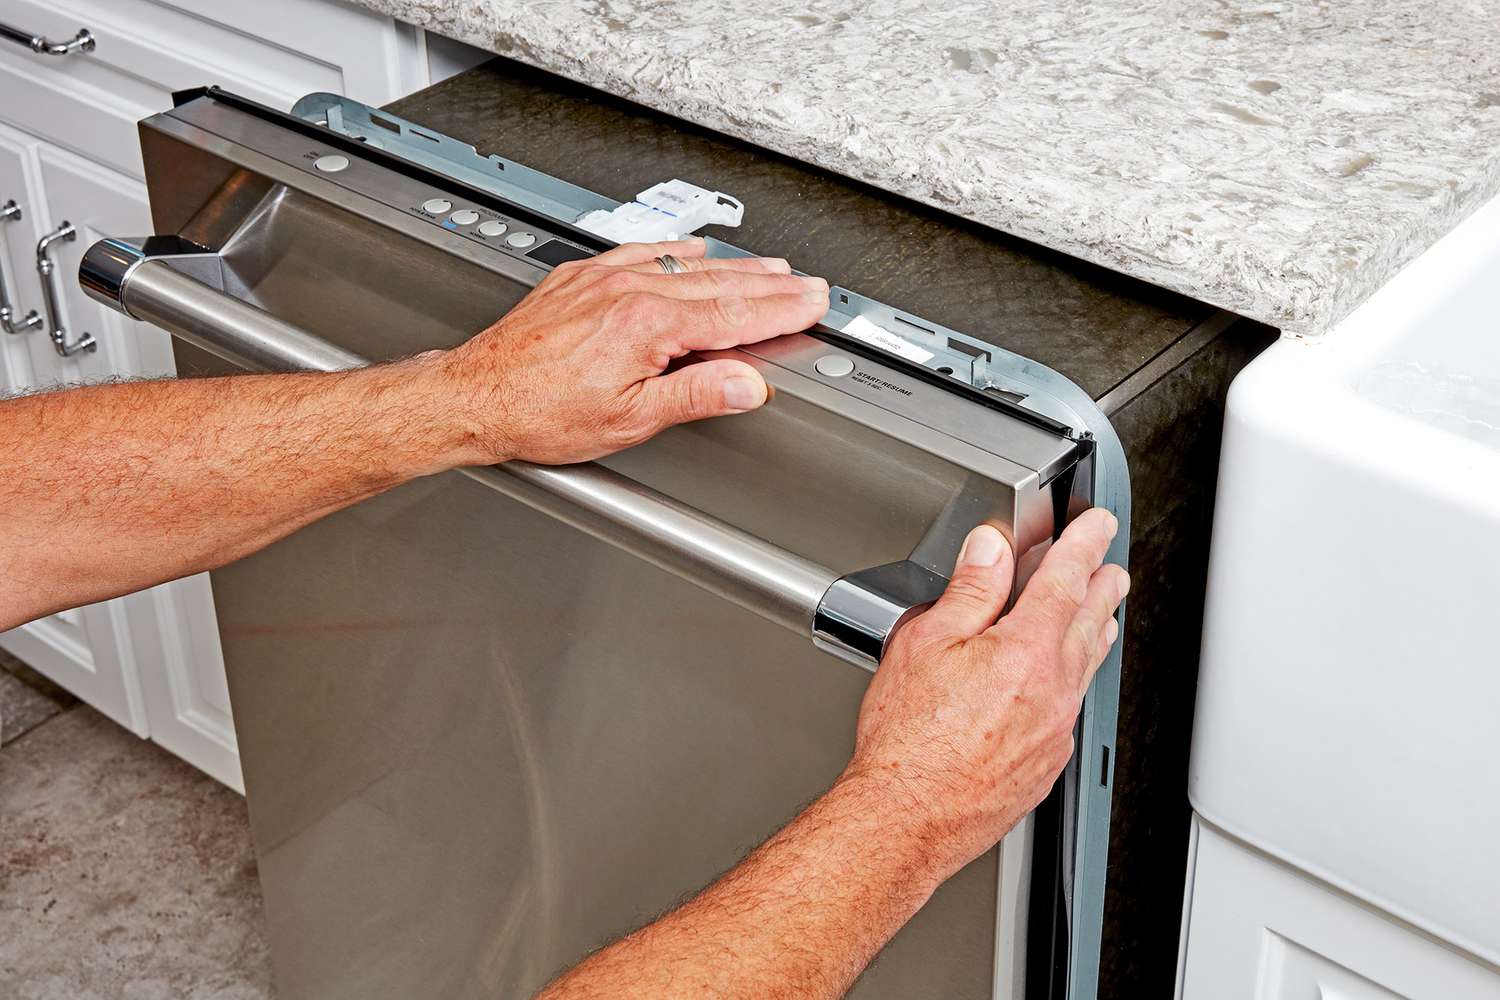 How To Install Dishwasher End Panel